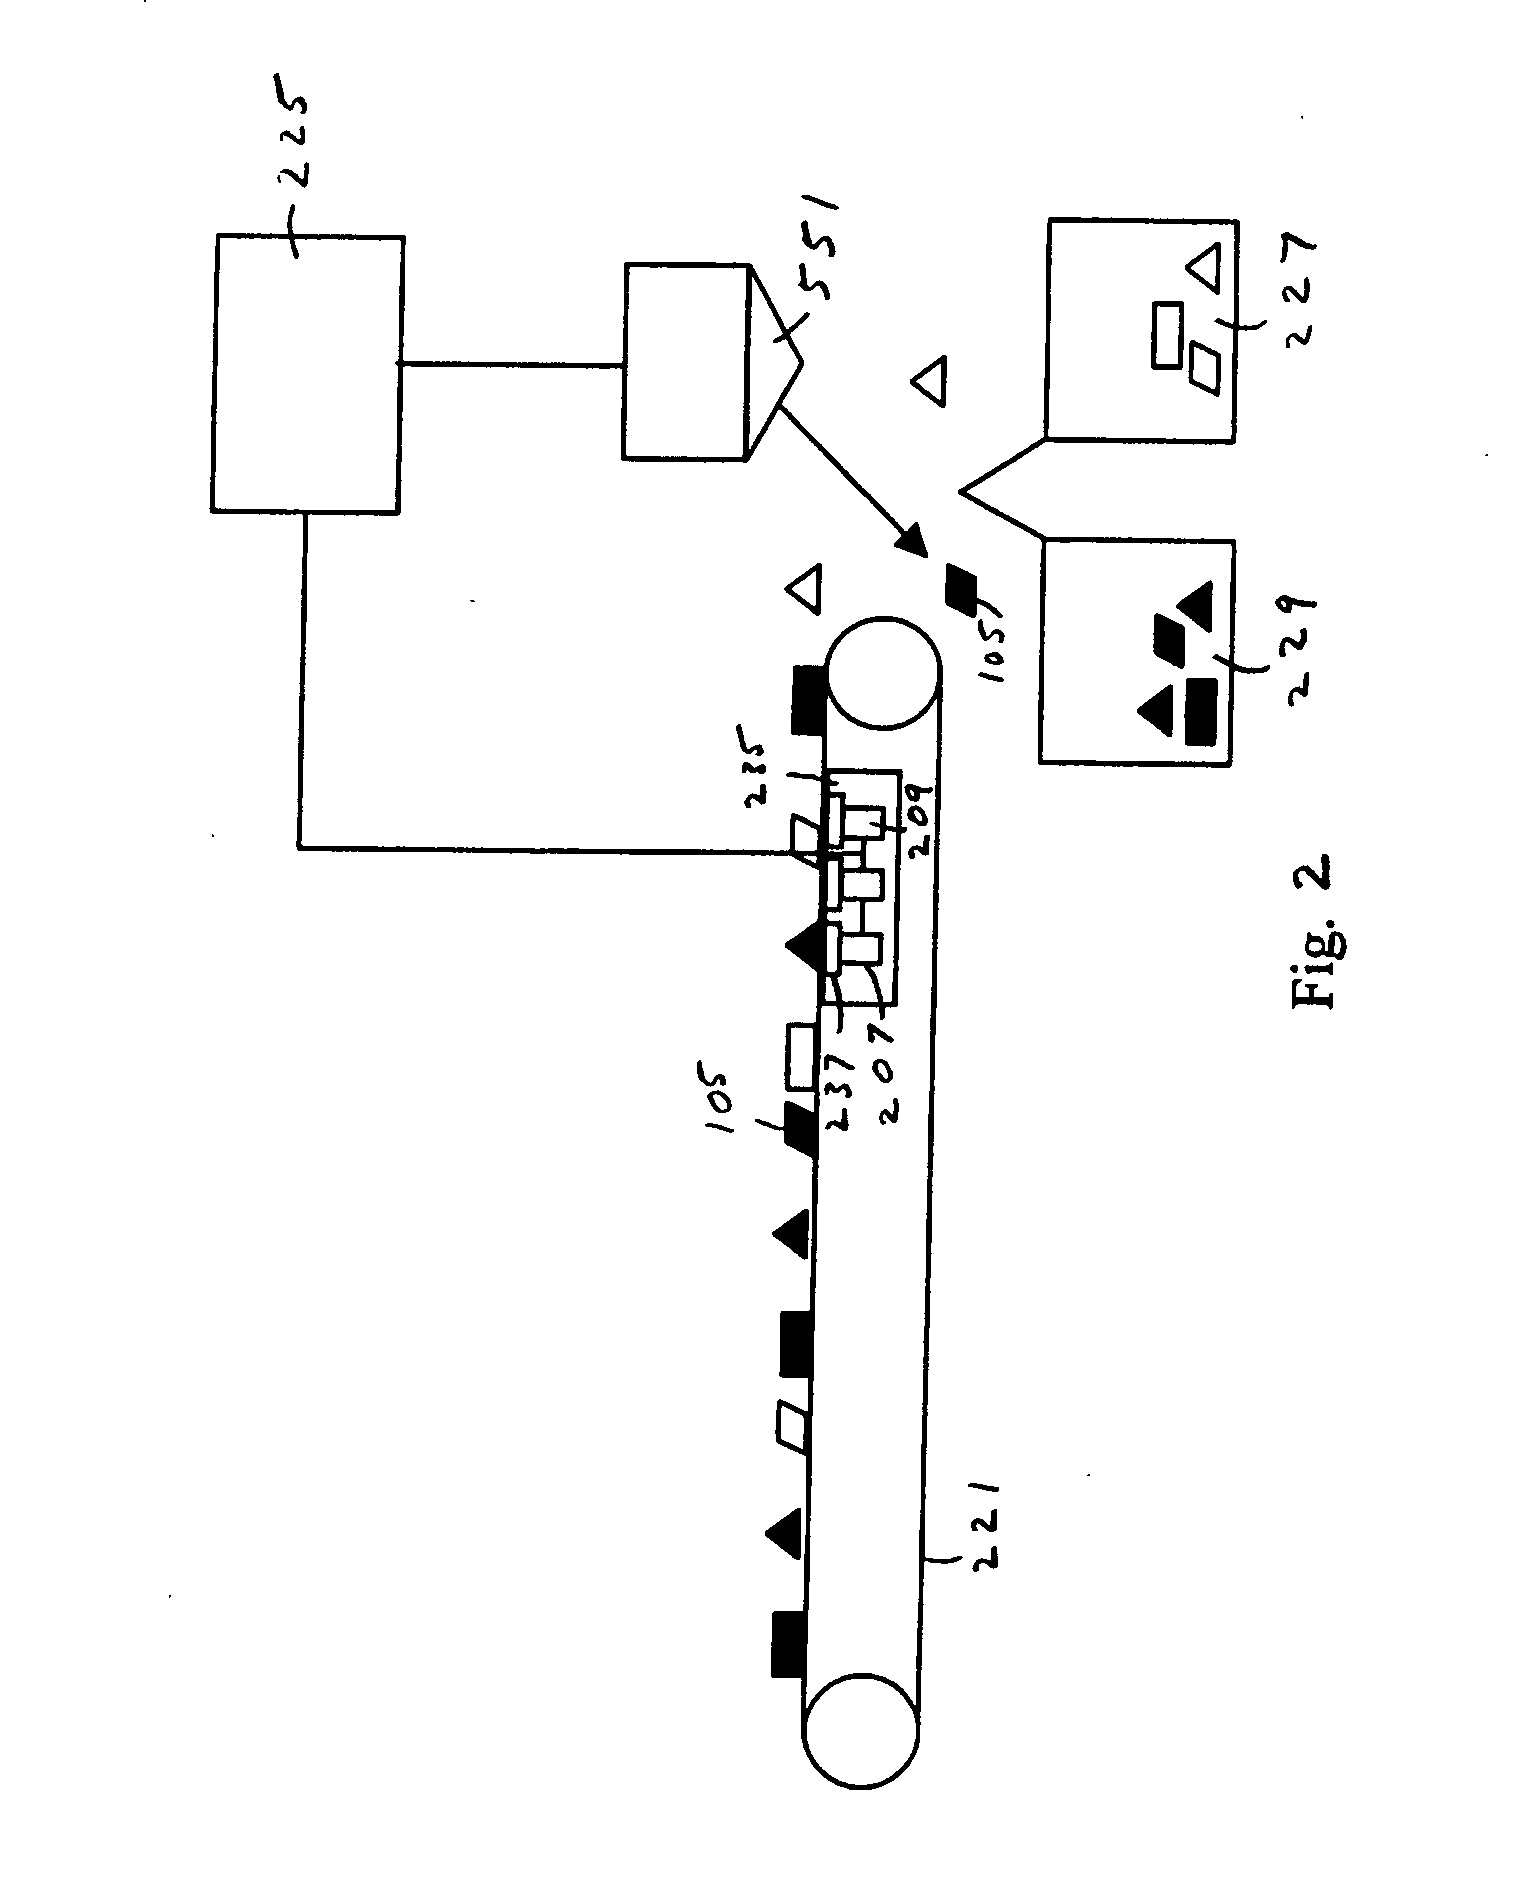 Method and apparatus for sorting fine nonferrous metals and insulated wire pieces